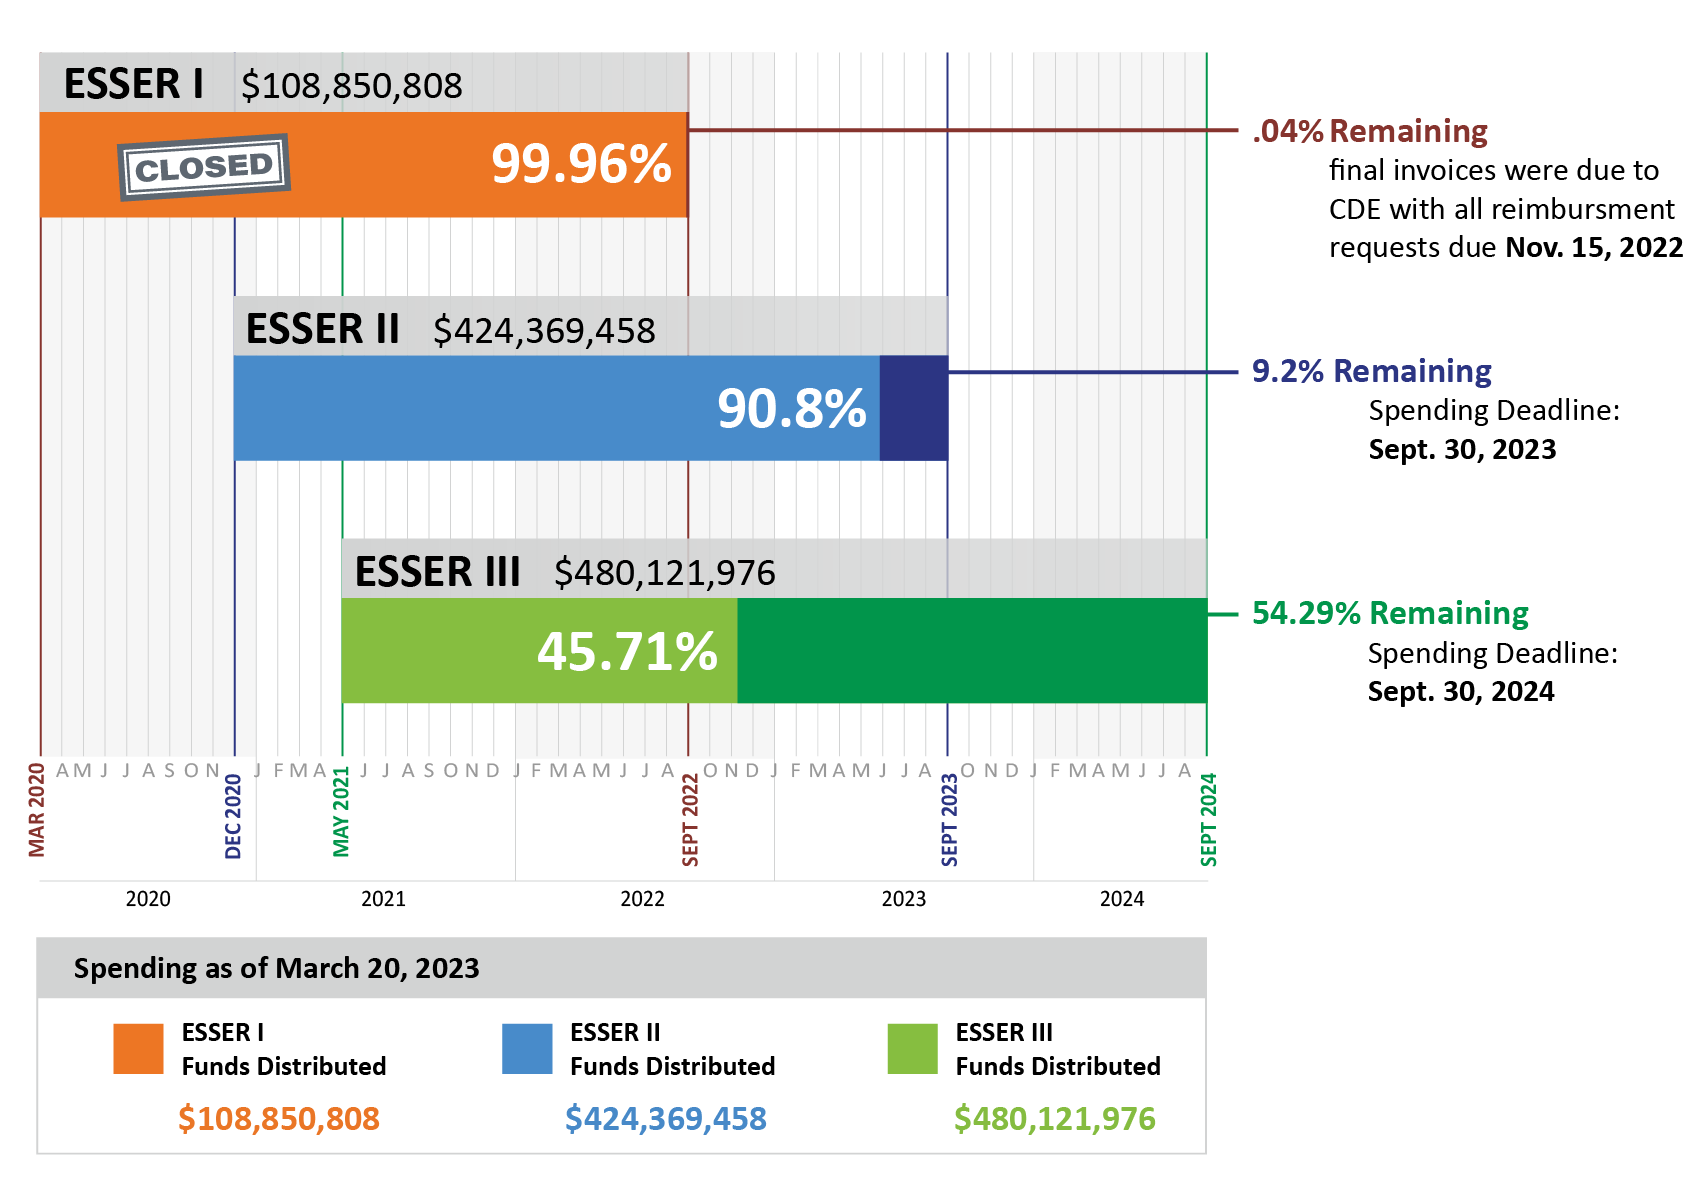 Chart with time frame showing Mar. 2020 to Sept. 2024. ESSER 1: $108,894,404, closed, 99.96%. .05% remaining, final invoices due to CDE with all reimbursement requests due Nov. 15, 2022. ESSER 2: $424,369,458, 90.8%, 9.2% remaining, Spending Deadline: Sept. 30, 2023. ESSER 3: $480,121,976, 45.71%, 54.29% remaining, spending deadline: Sept. 30, 2024. Spending as of Mar. 20, 2023 - Funds Distributed: ESSER I: $108,850,808. ESSER II: $424,369,458. ESSER III: $480,121,976.